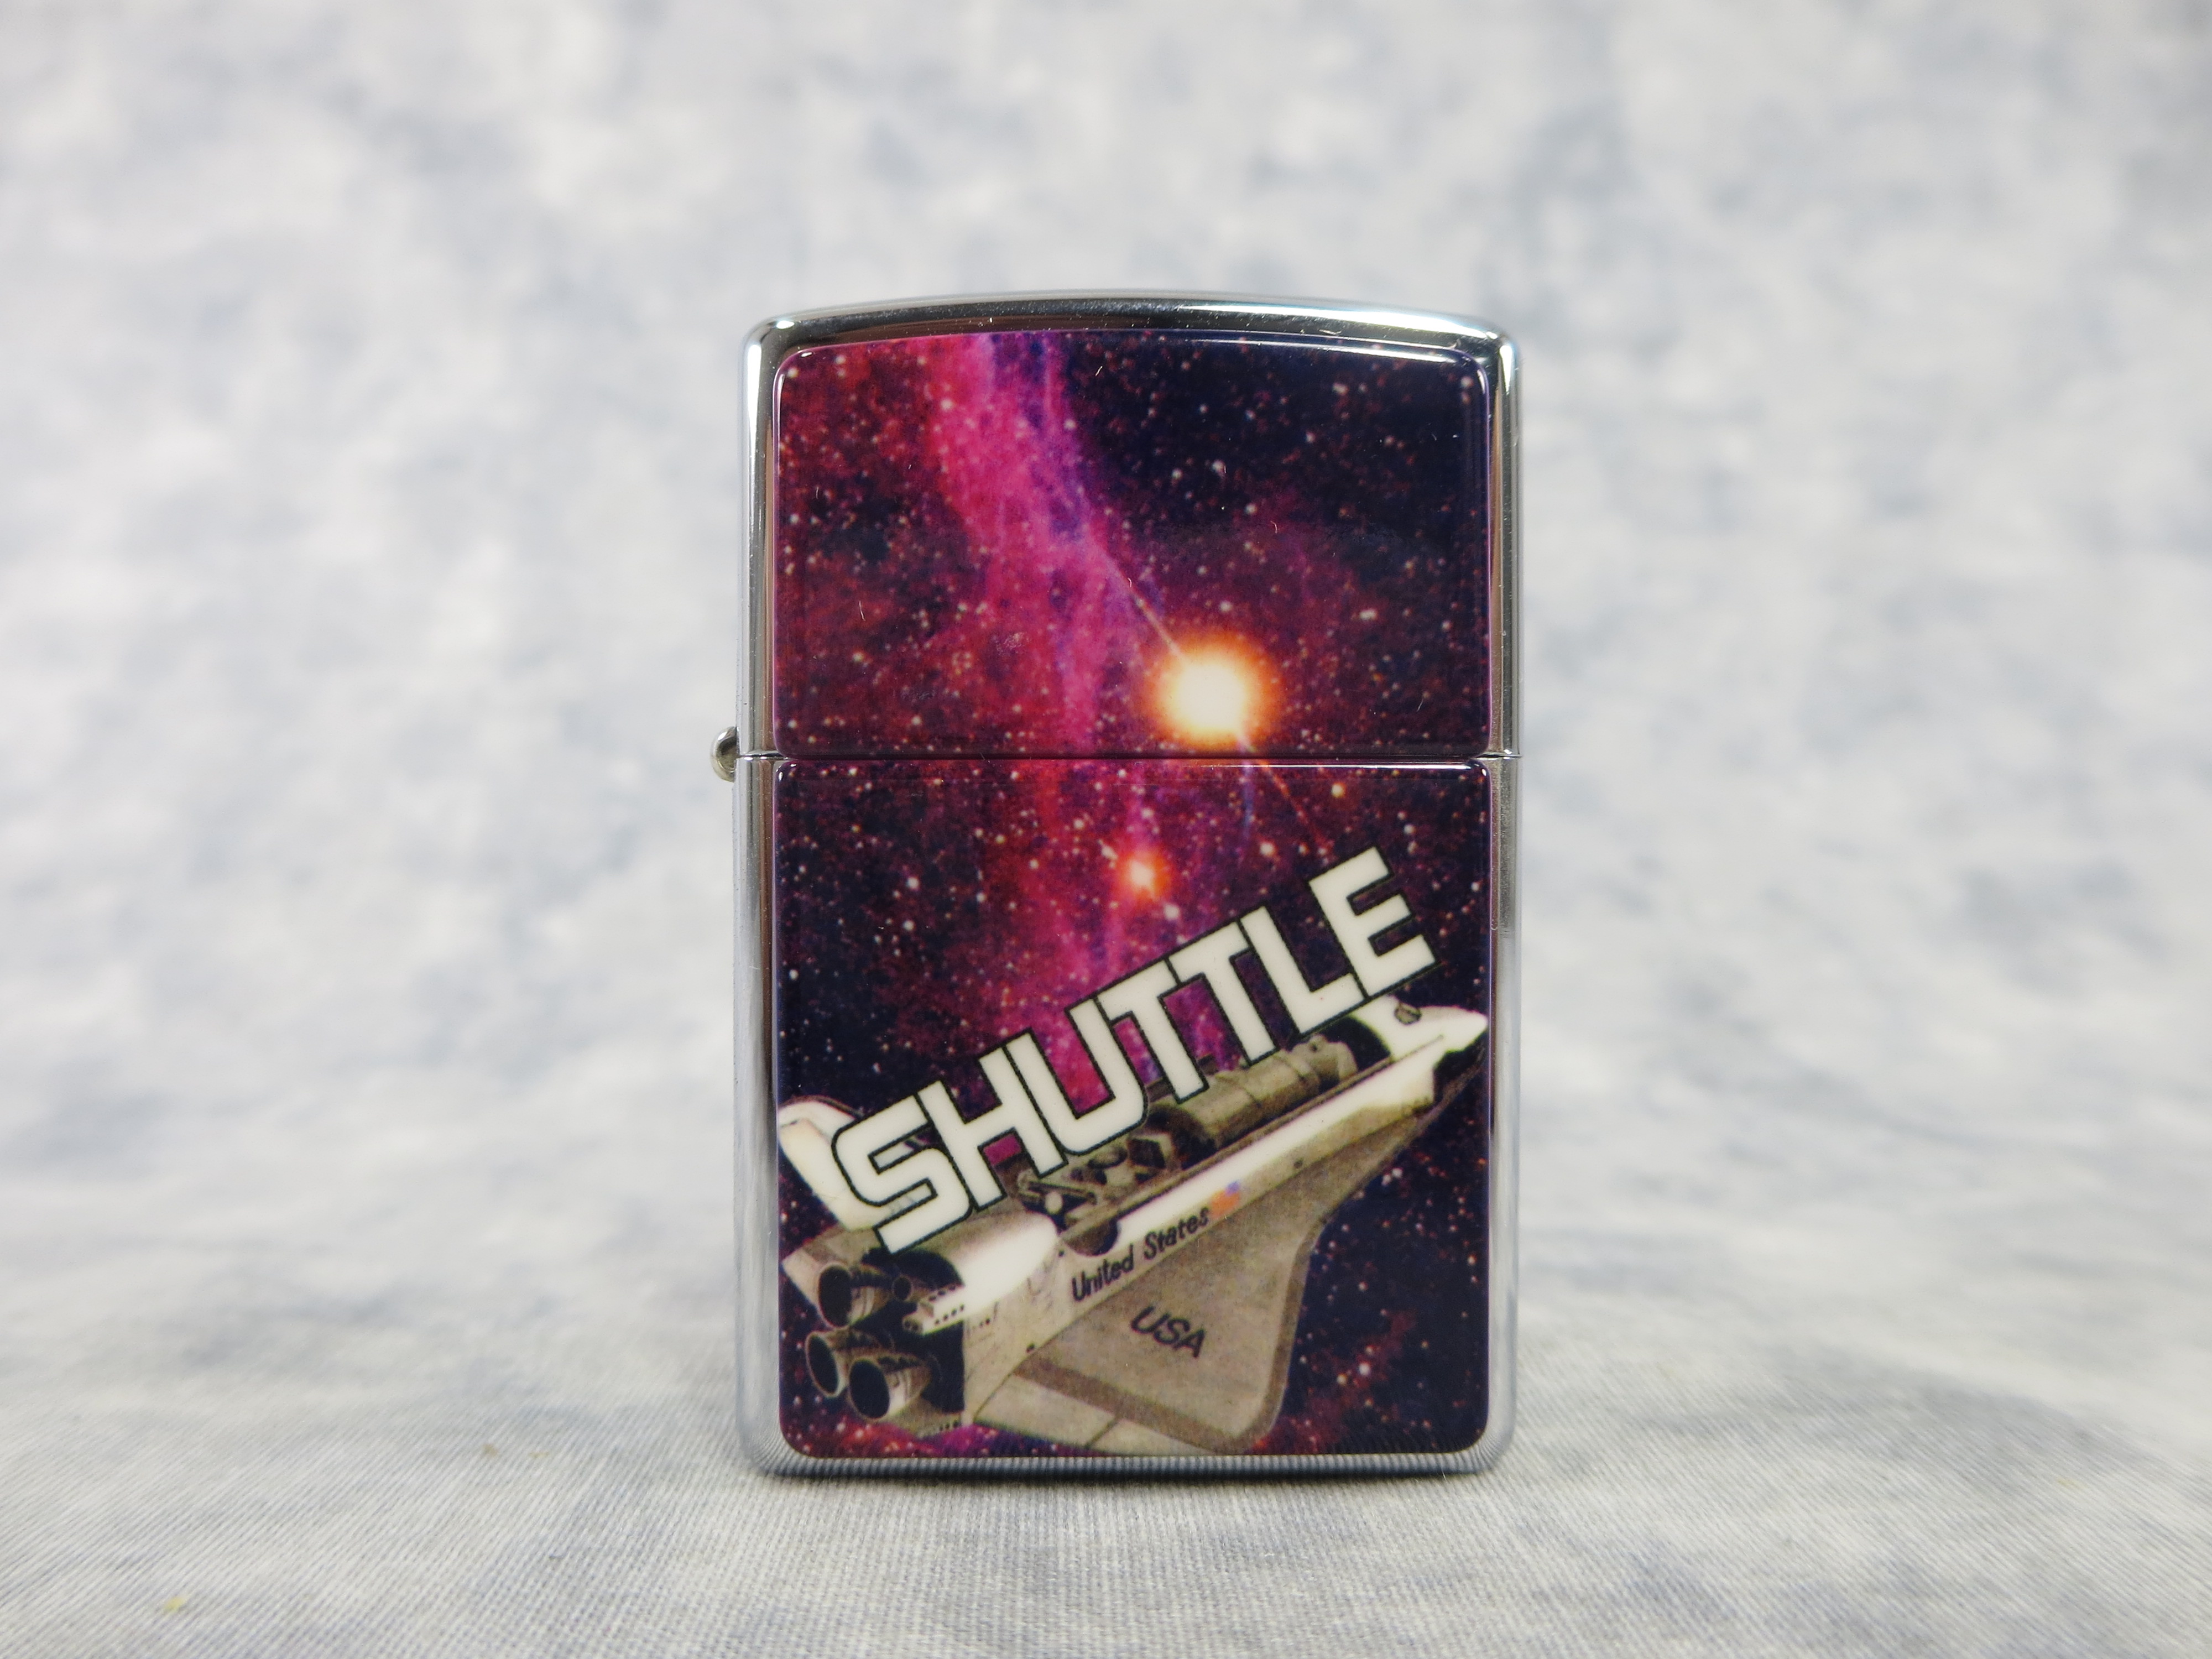 Value of SPACE SHUTTLE Polished Chrome Limited Edition Lighter